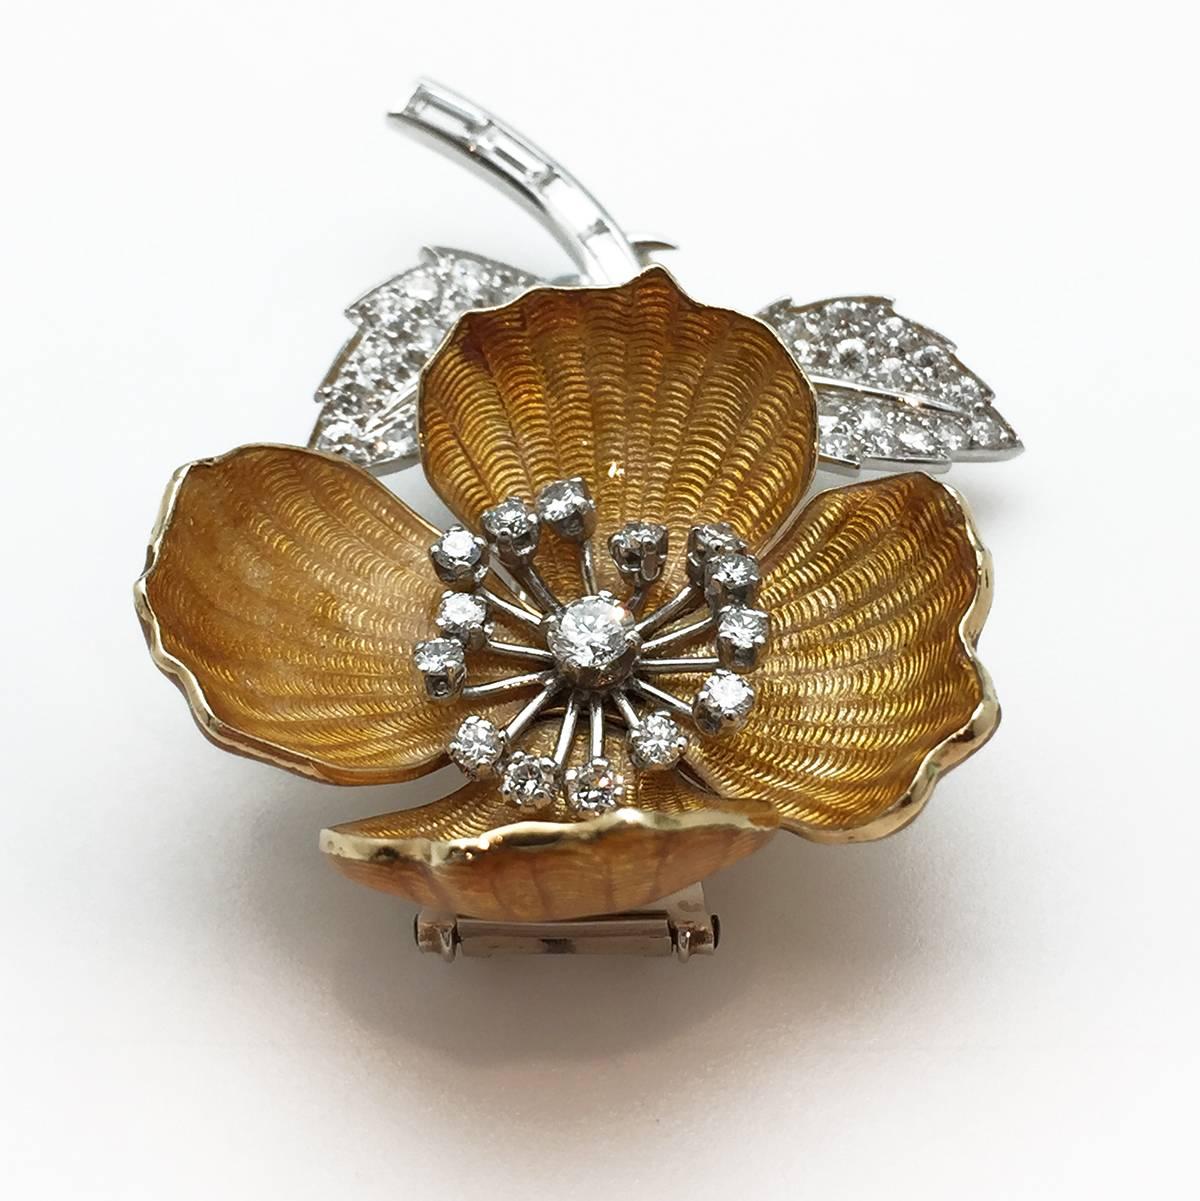 A beautiful Boucheron brooch "Eglantine" collection made in 750/000 gold and 950/000 platinum. This brooch is designed as a flower which stem, leaves and pistil are set with baguette cut or brilliant cut diamonds. The four 750/000 yellow